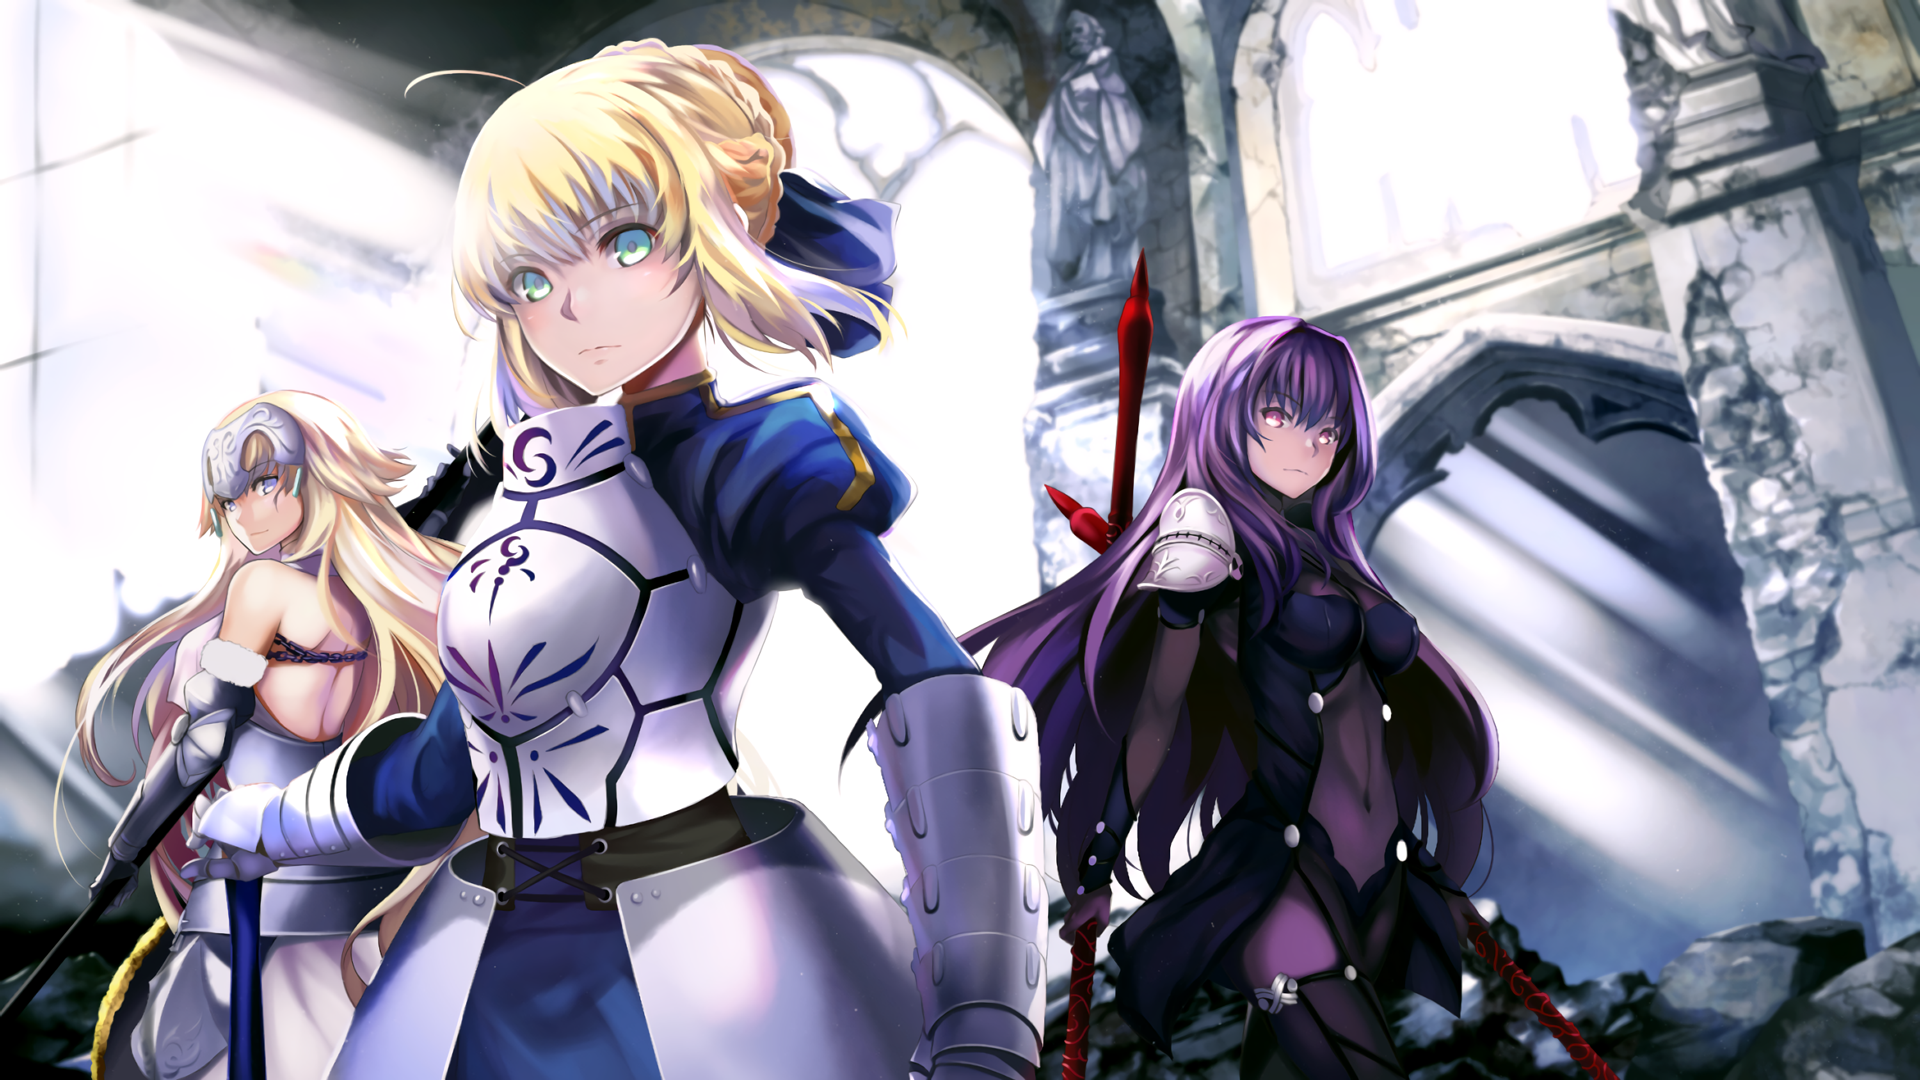 4 Ruler Fate Apocrypha Hd Wallpapers Background Images Wallpaper Abyss